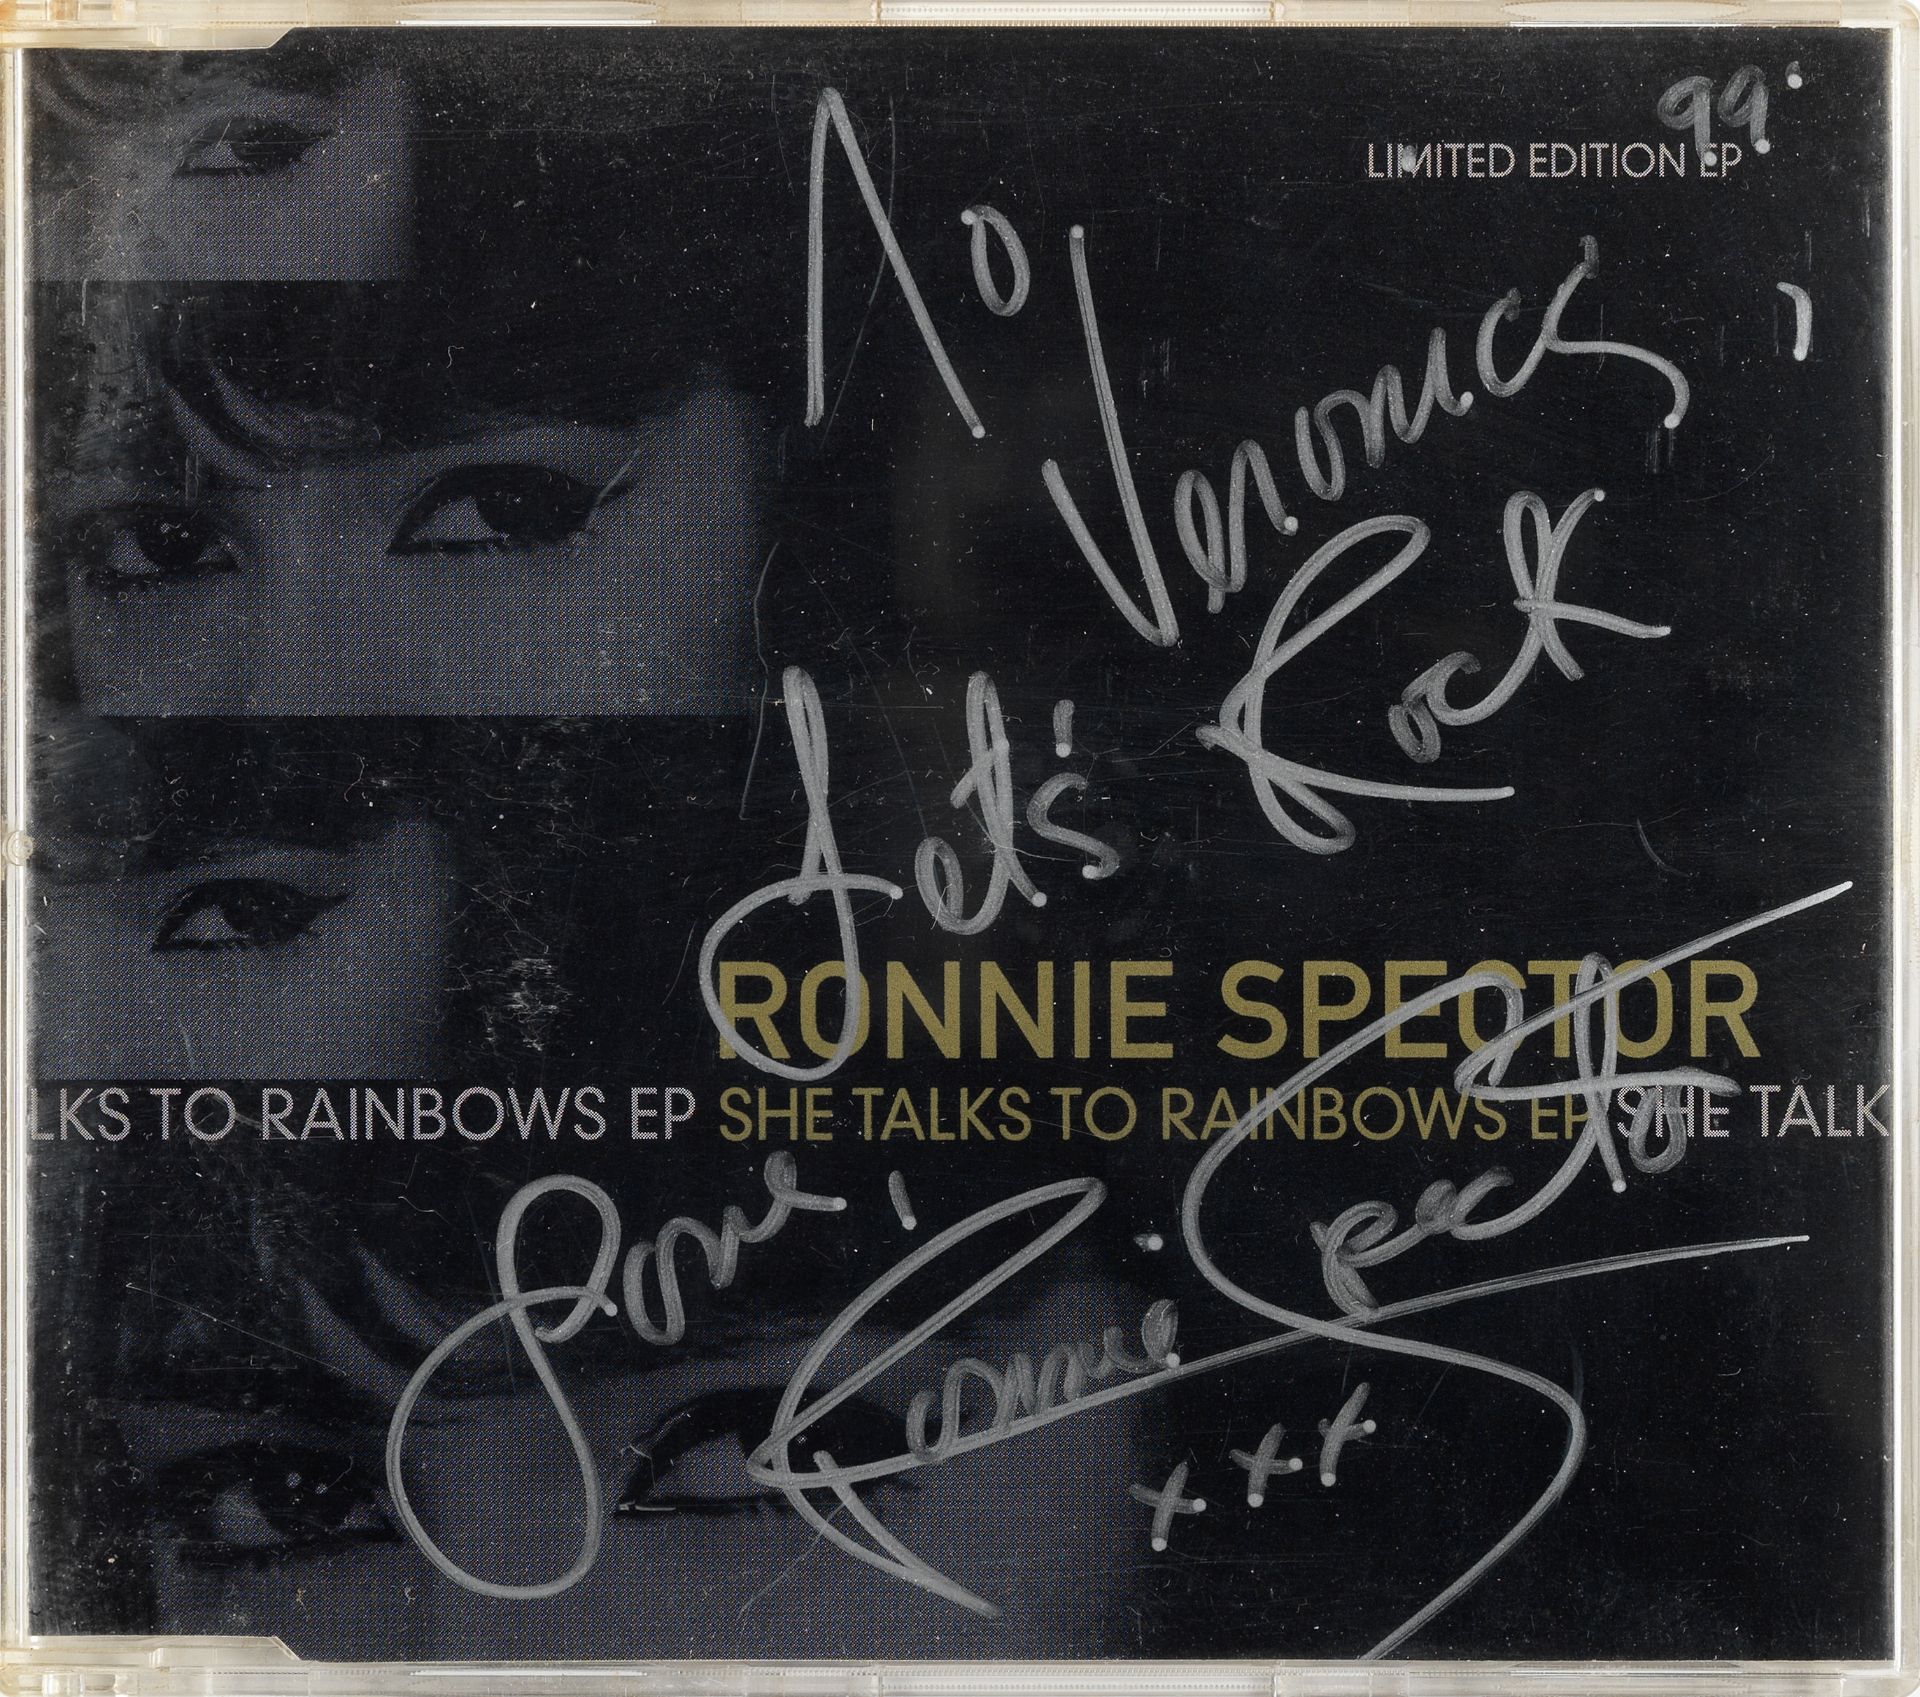 Ronnie Spector: Autographs And Other Material, Qty